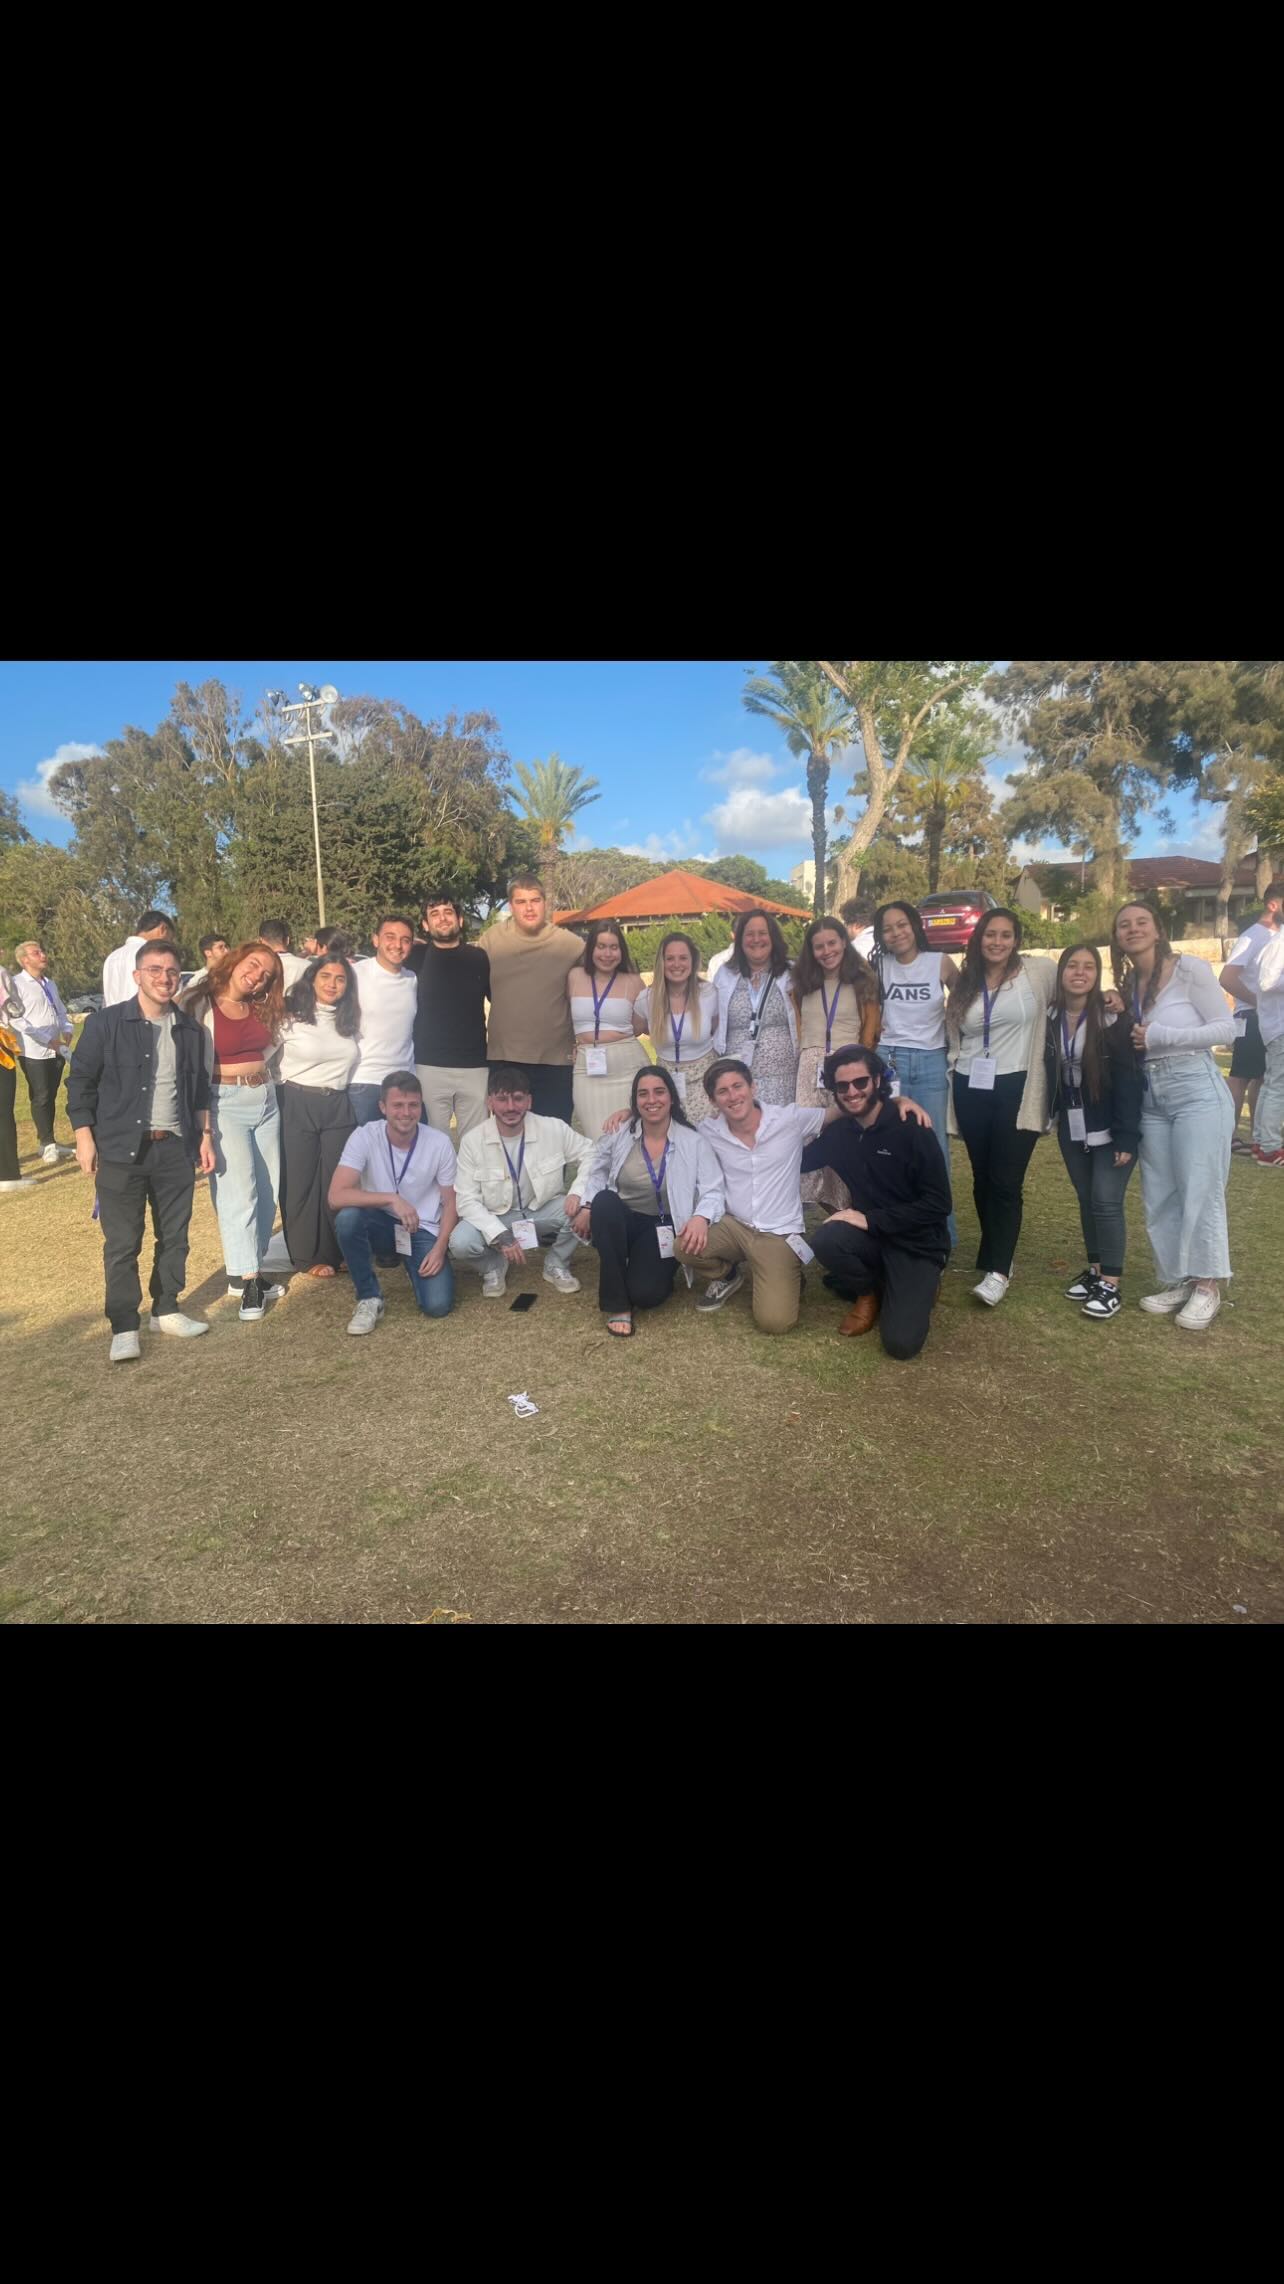 Shabbat Shalom from Israel where our Director of Jewish Life, Lauren Chizner, is attending the JAFI Training Seminar with our amazing 2023 Shlichim!